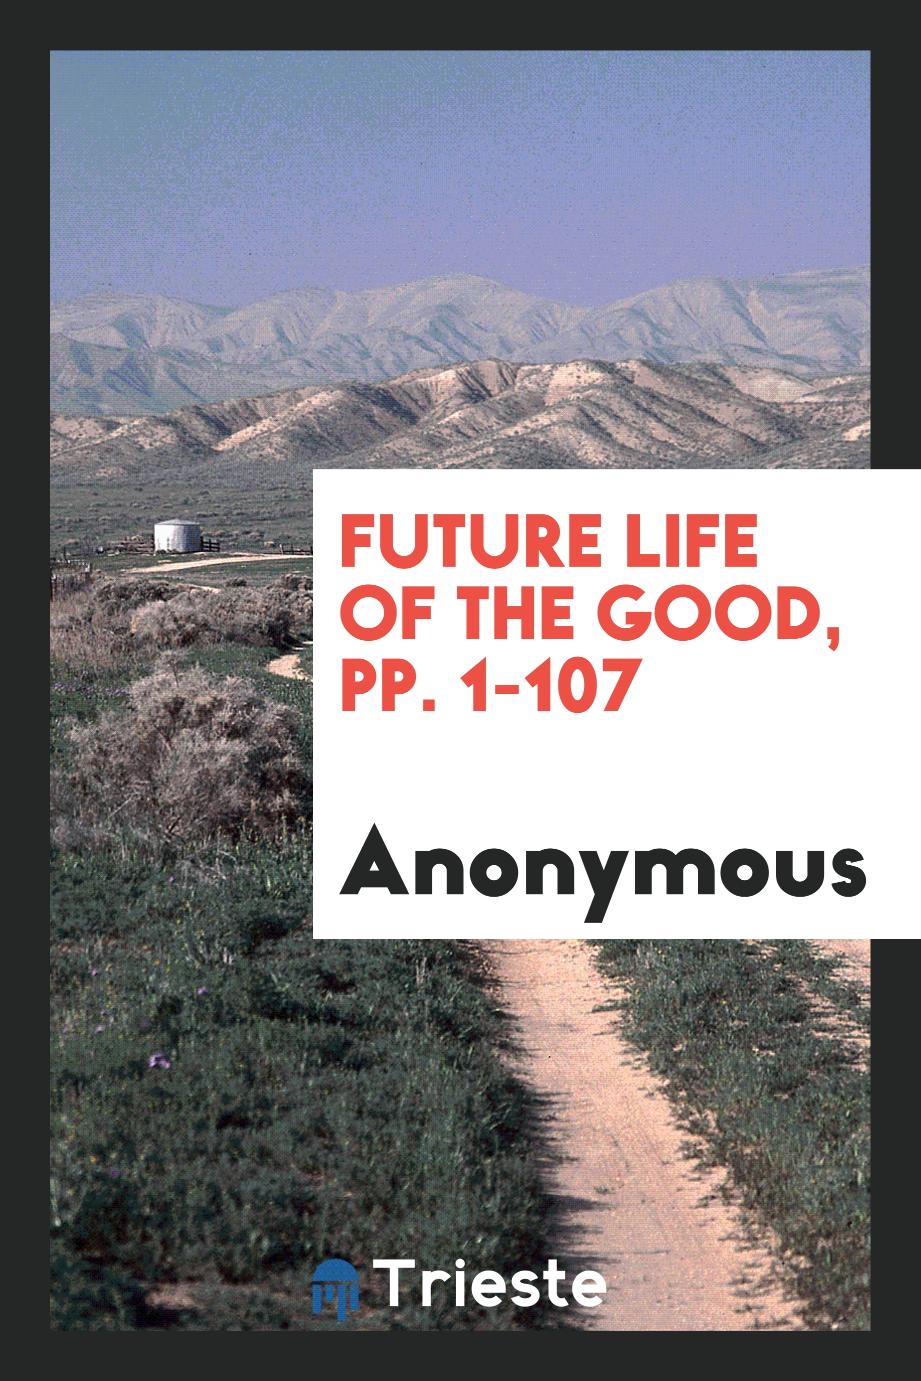 Future Life of the Good, pp. 1-107